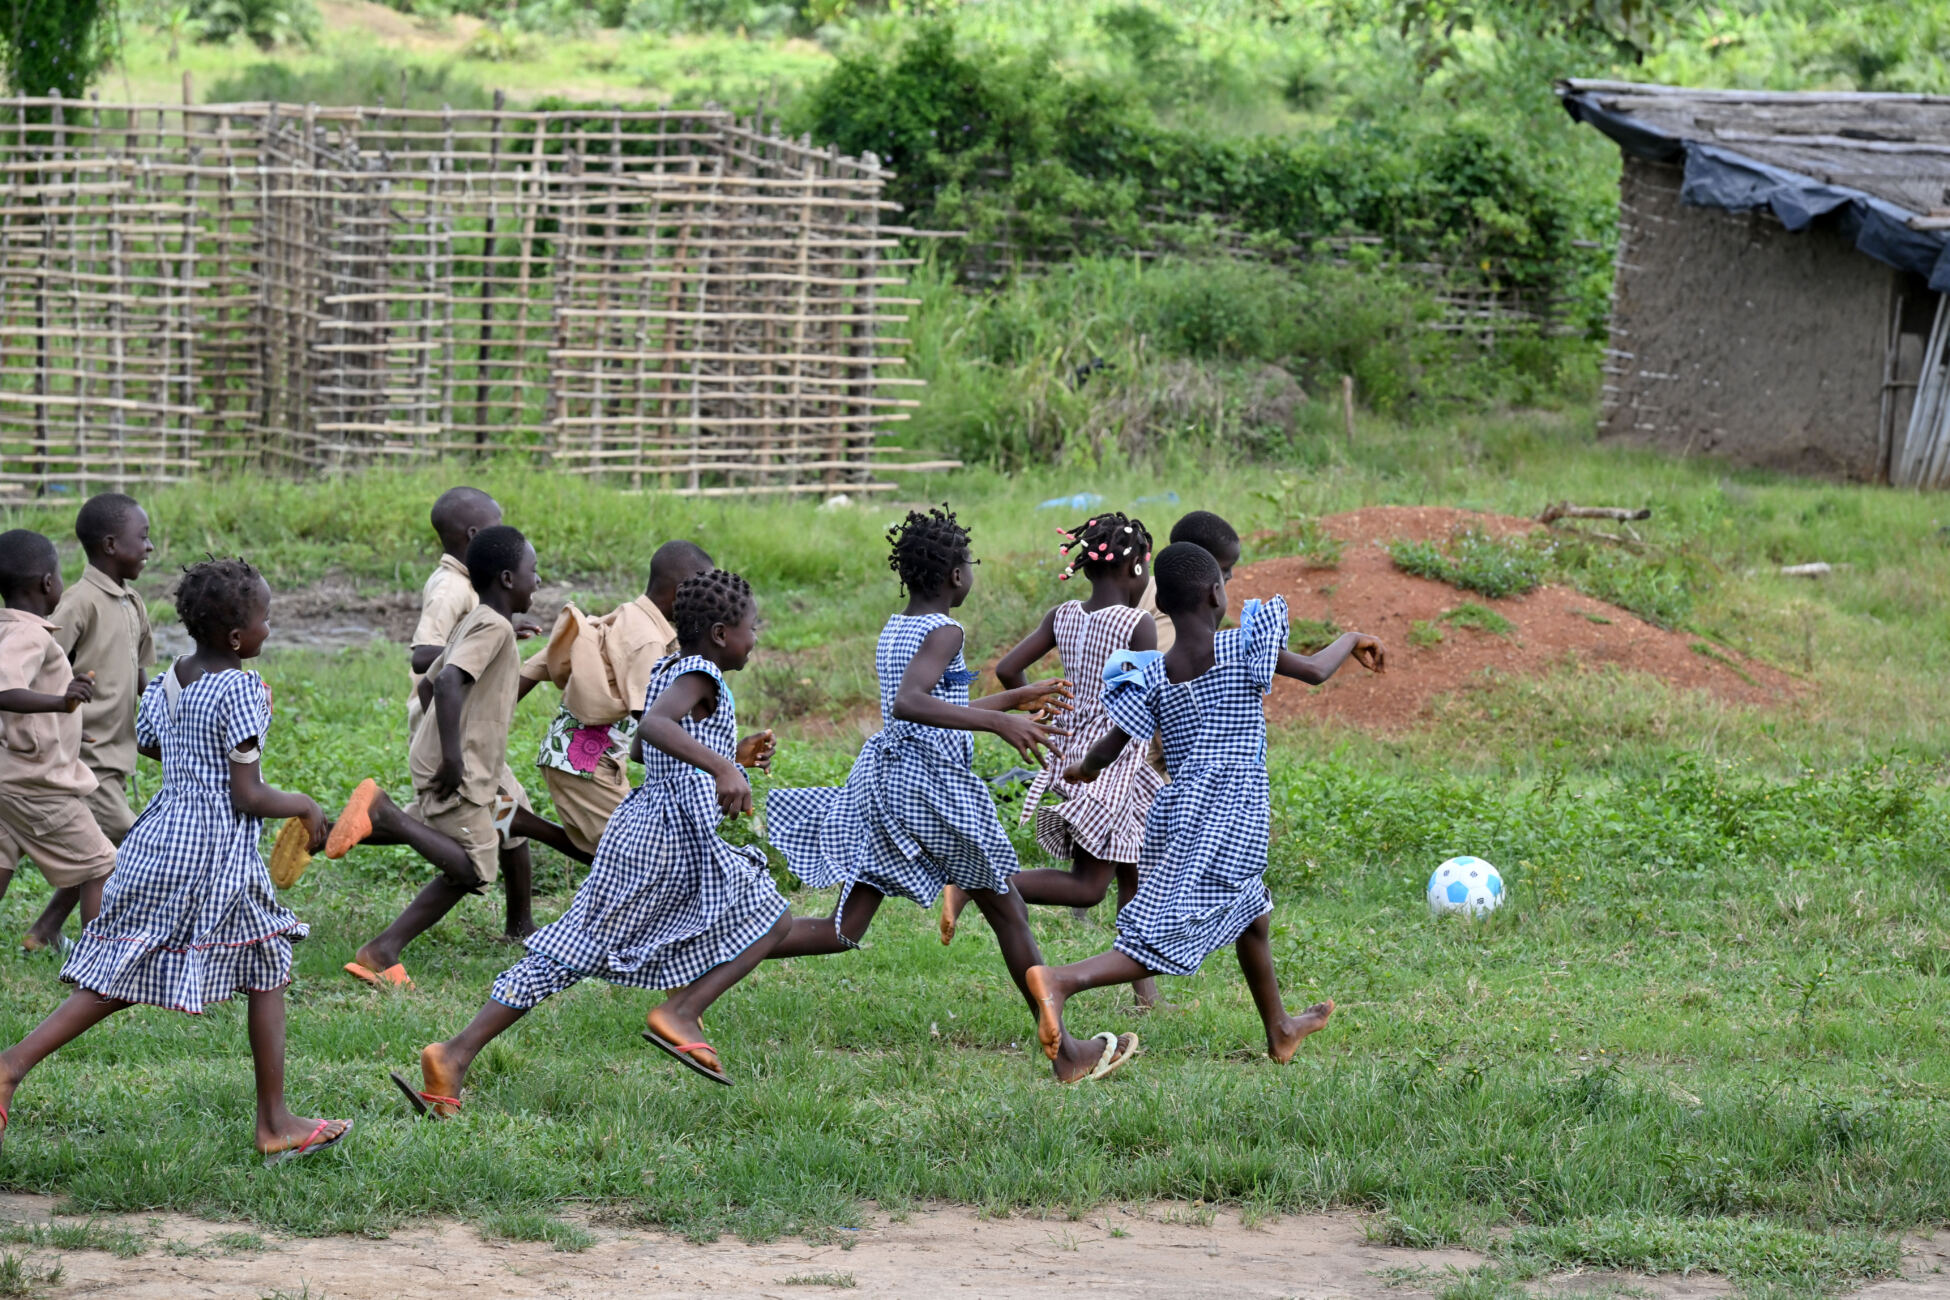 A group of children chase after a football in their school playground.